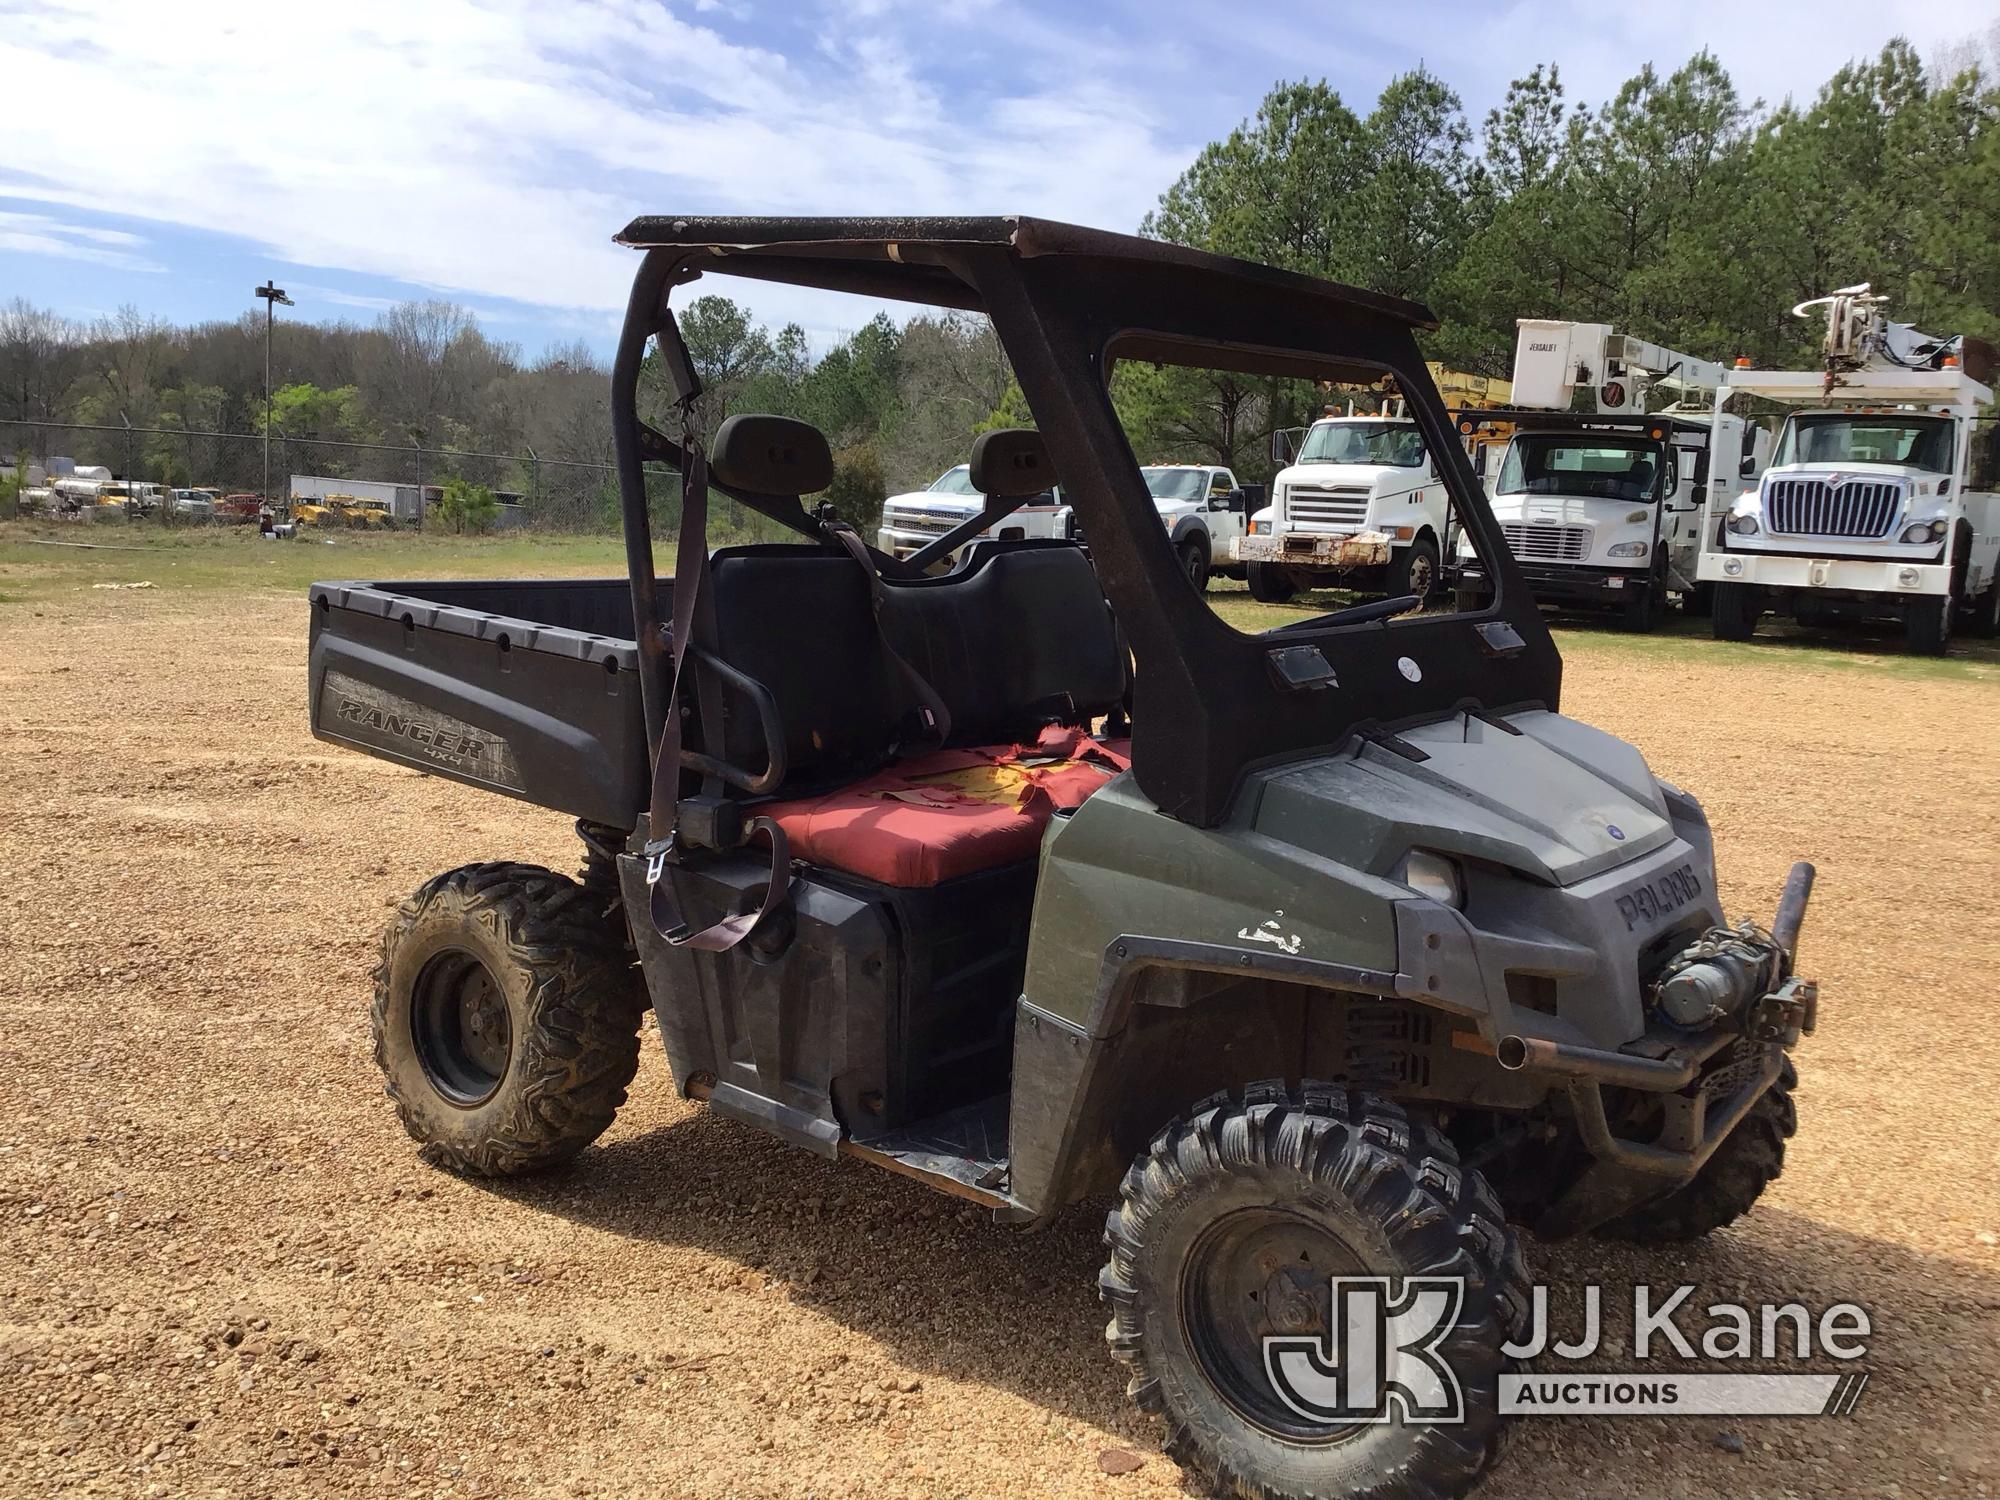 (Byram, MS) 2014 Polaris Ranger 800 4x4 Side by Side All-Terrain Vehicle No Title) (Jump to Start, R